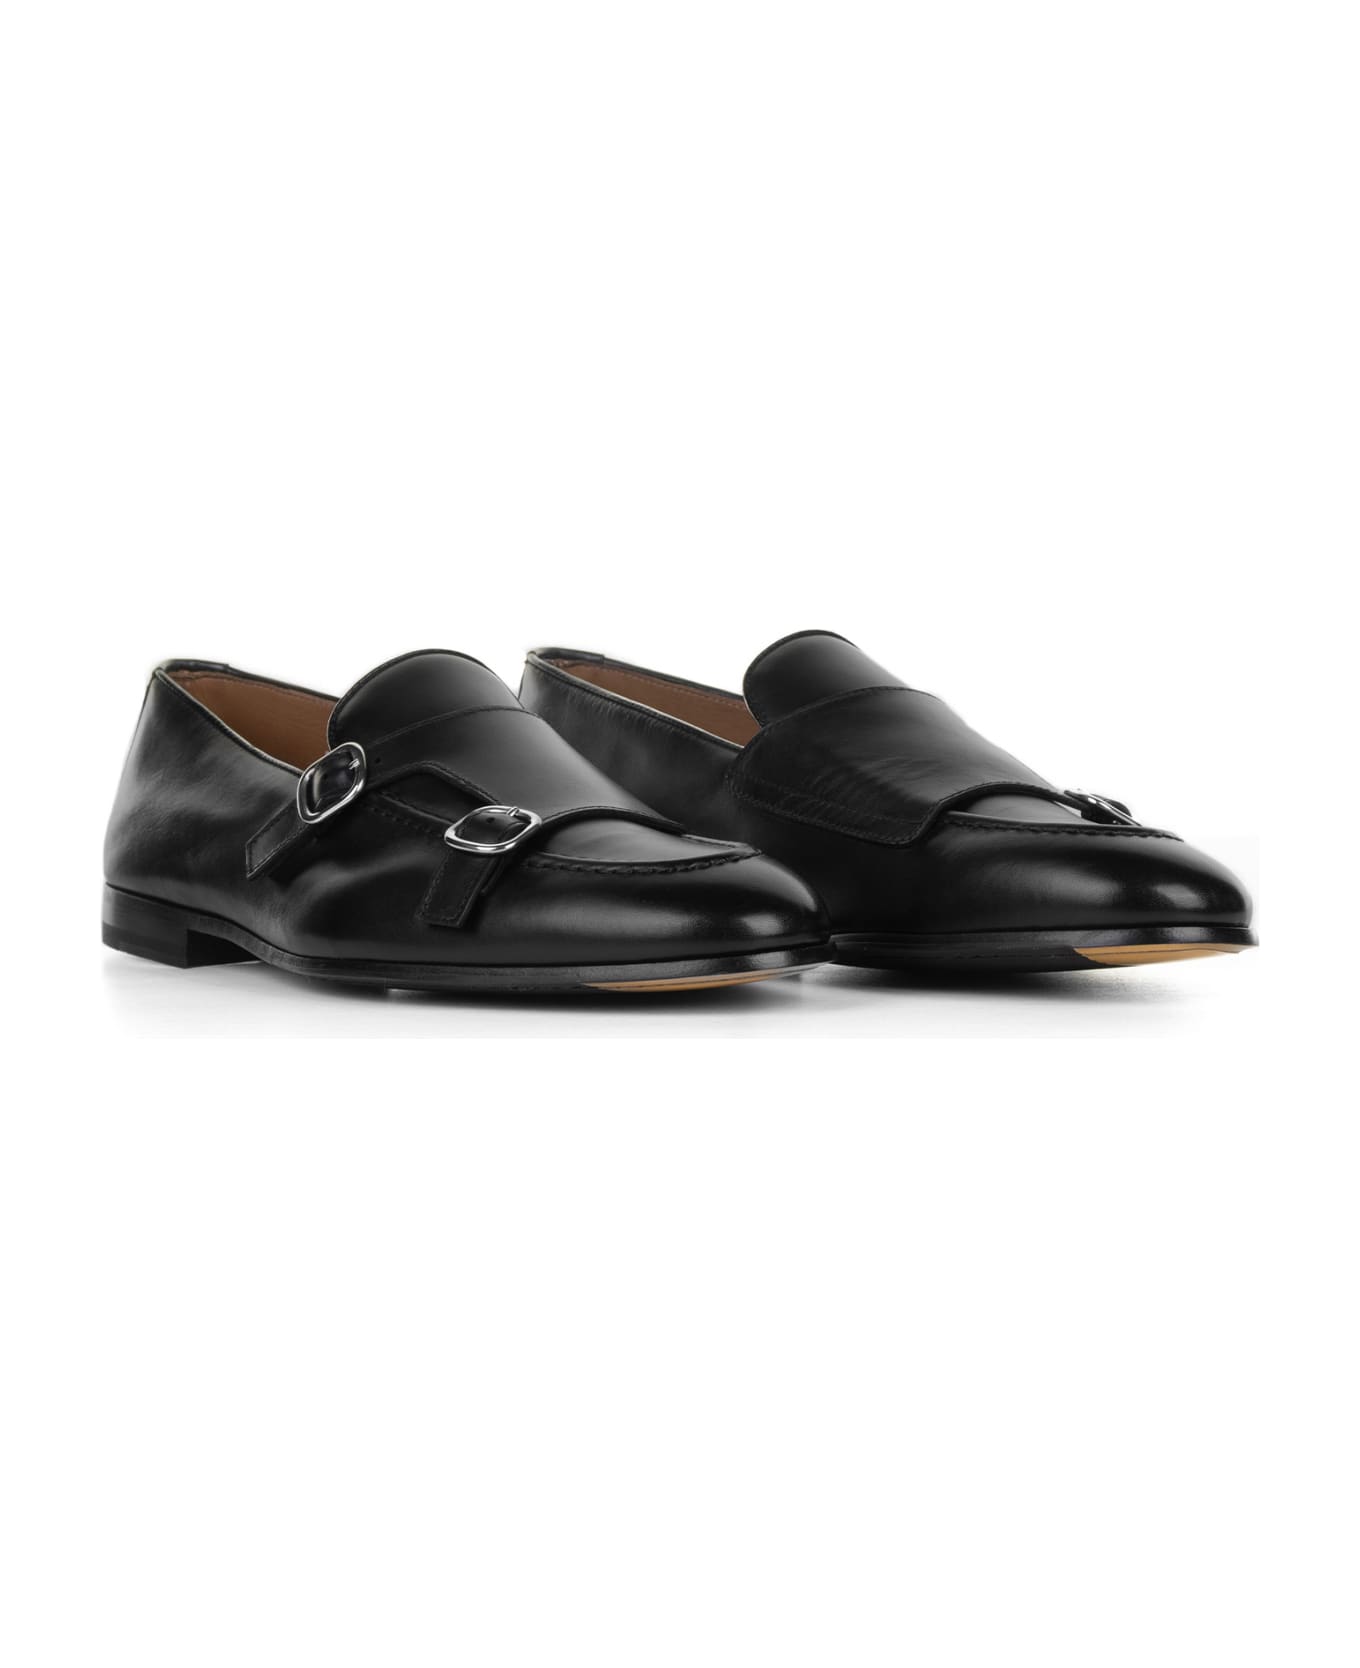 Doucal's Double Buckle Leather Moccasin - NERO